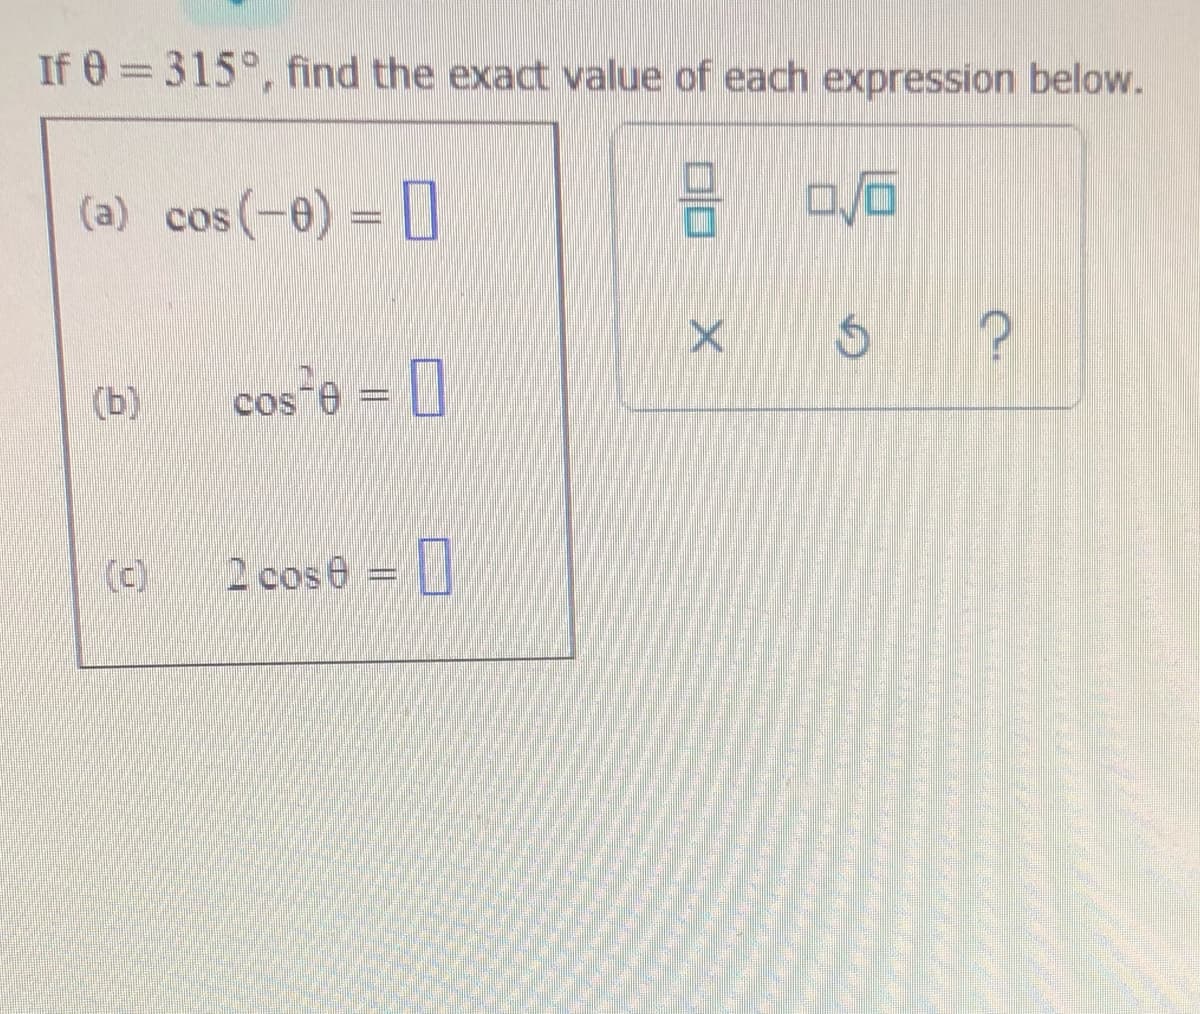 If 0 = 315°, find the exact value of each expression below.
(a) cos(-0) =
(b)
cos e = 0
(c)
2 cos e = |
